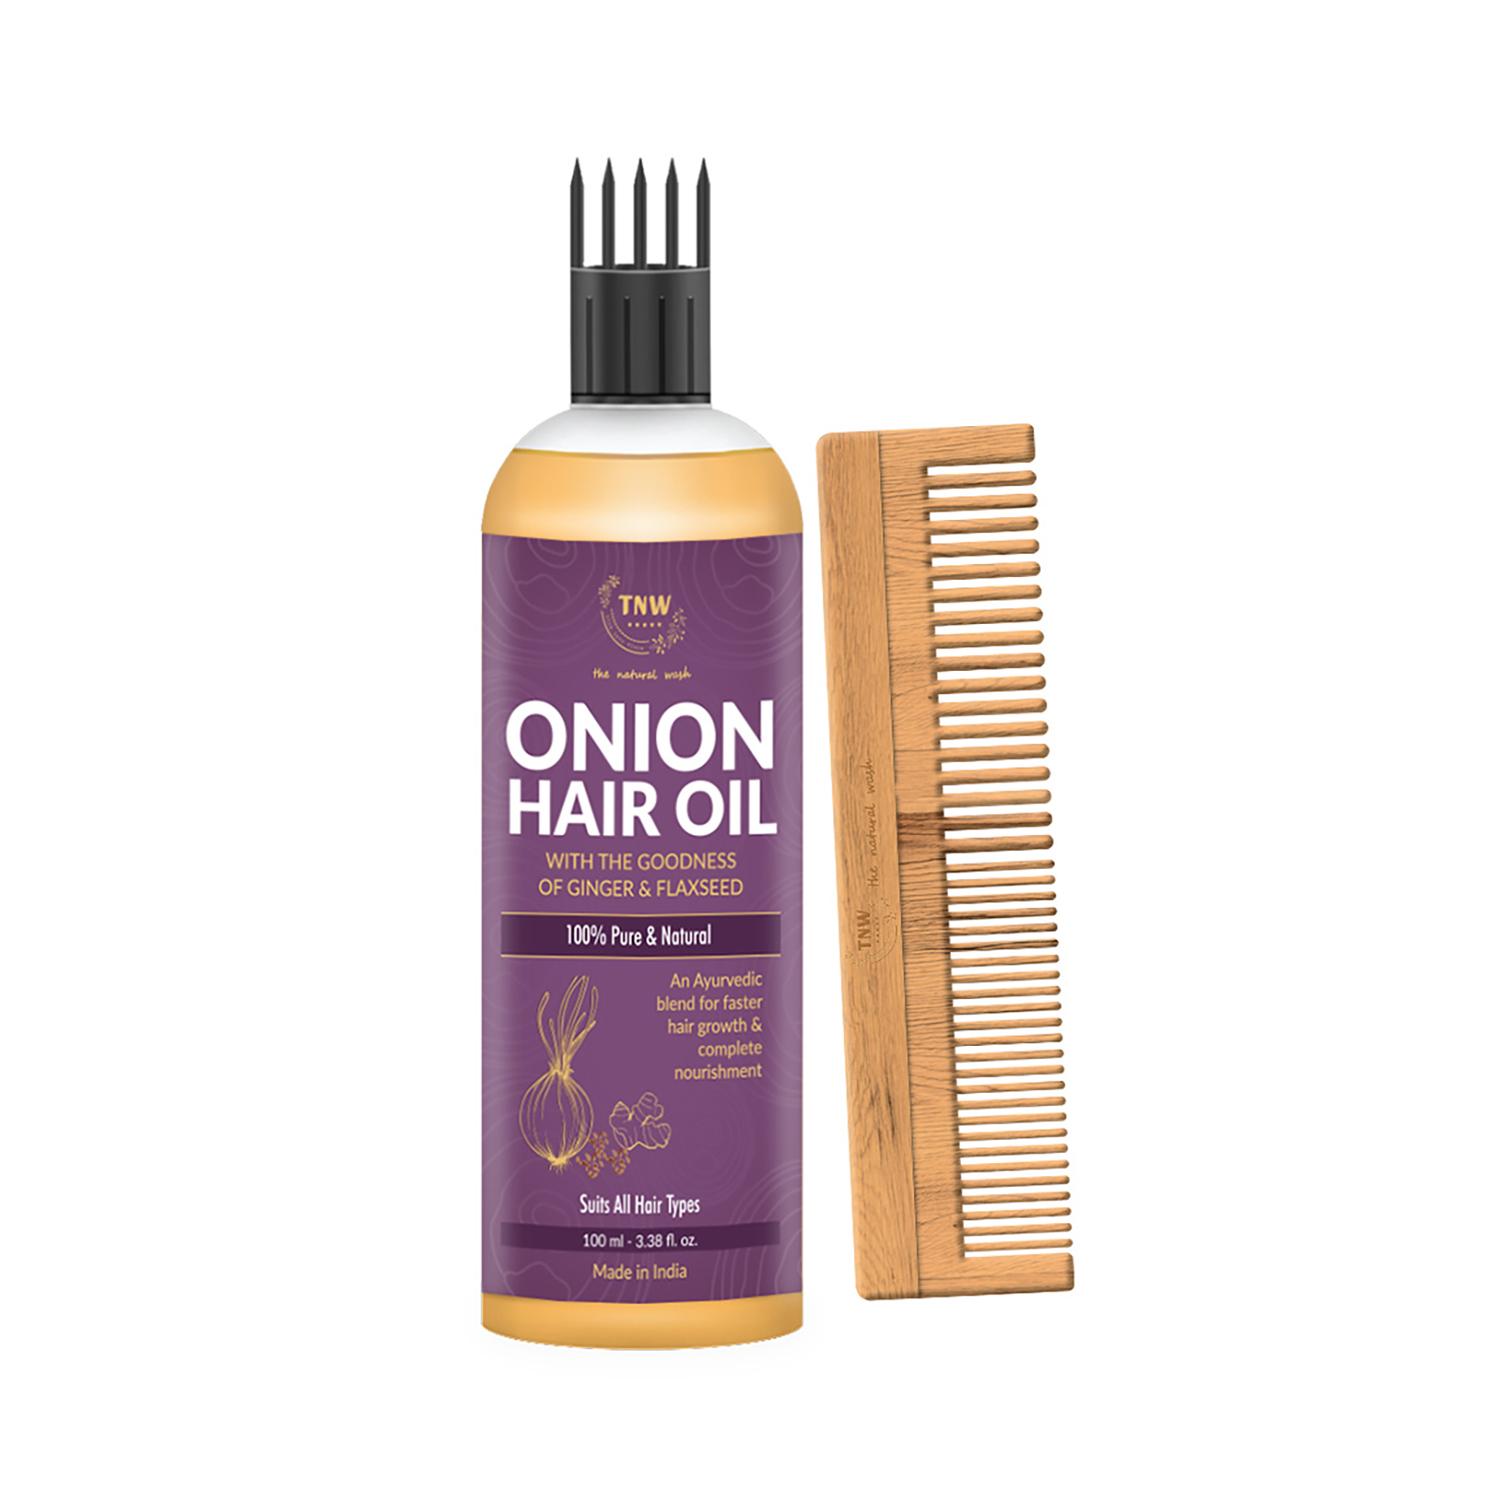 TNW The Natural Wash | TNW - The Natural Wash Onion Hair Oil and Neem Wood Combo